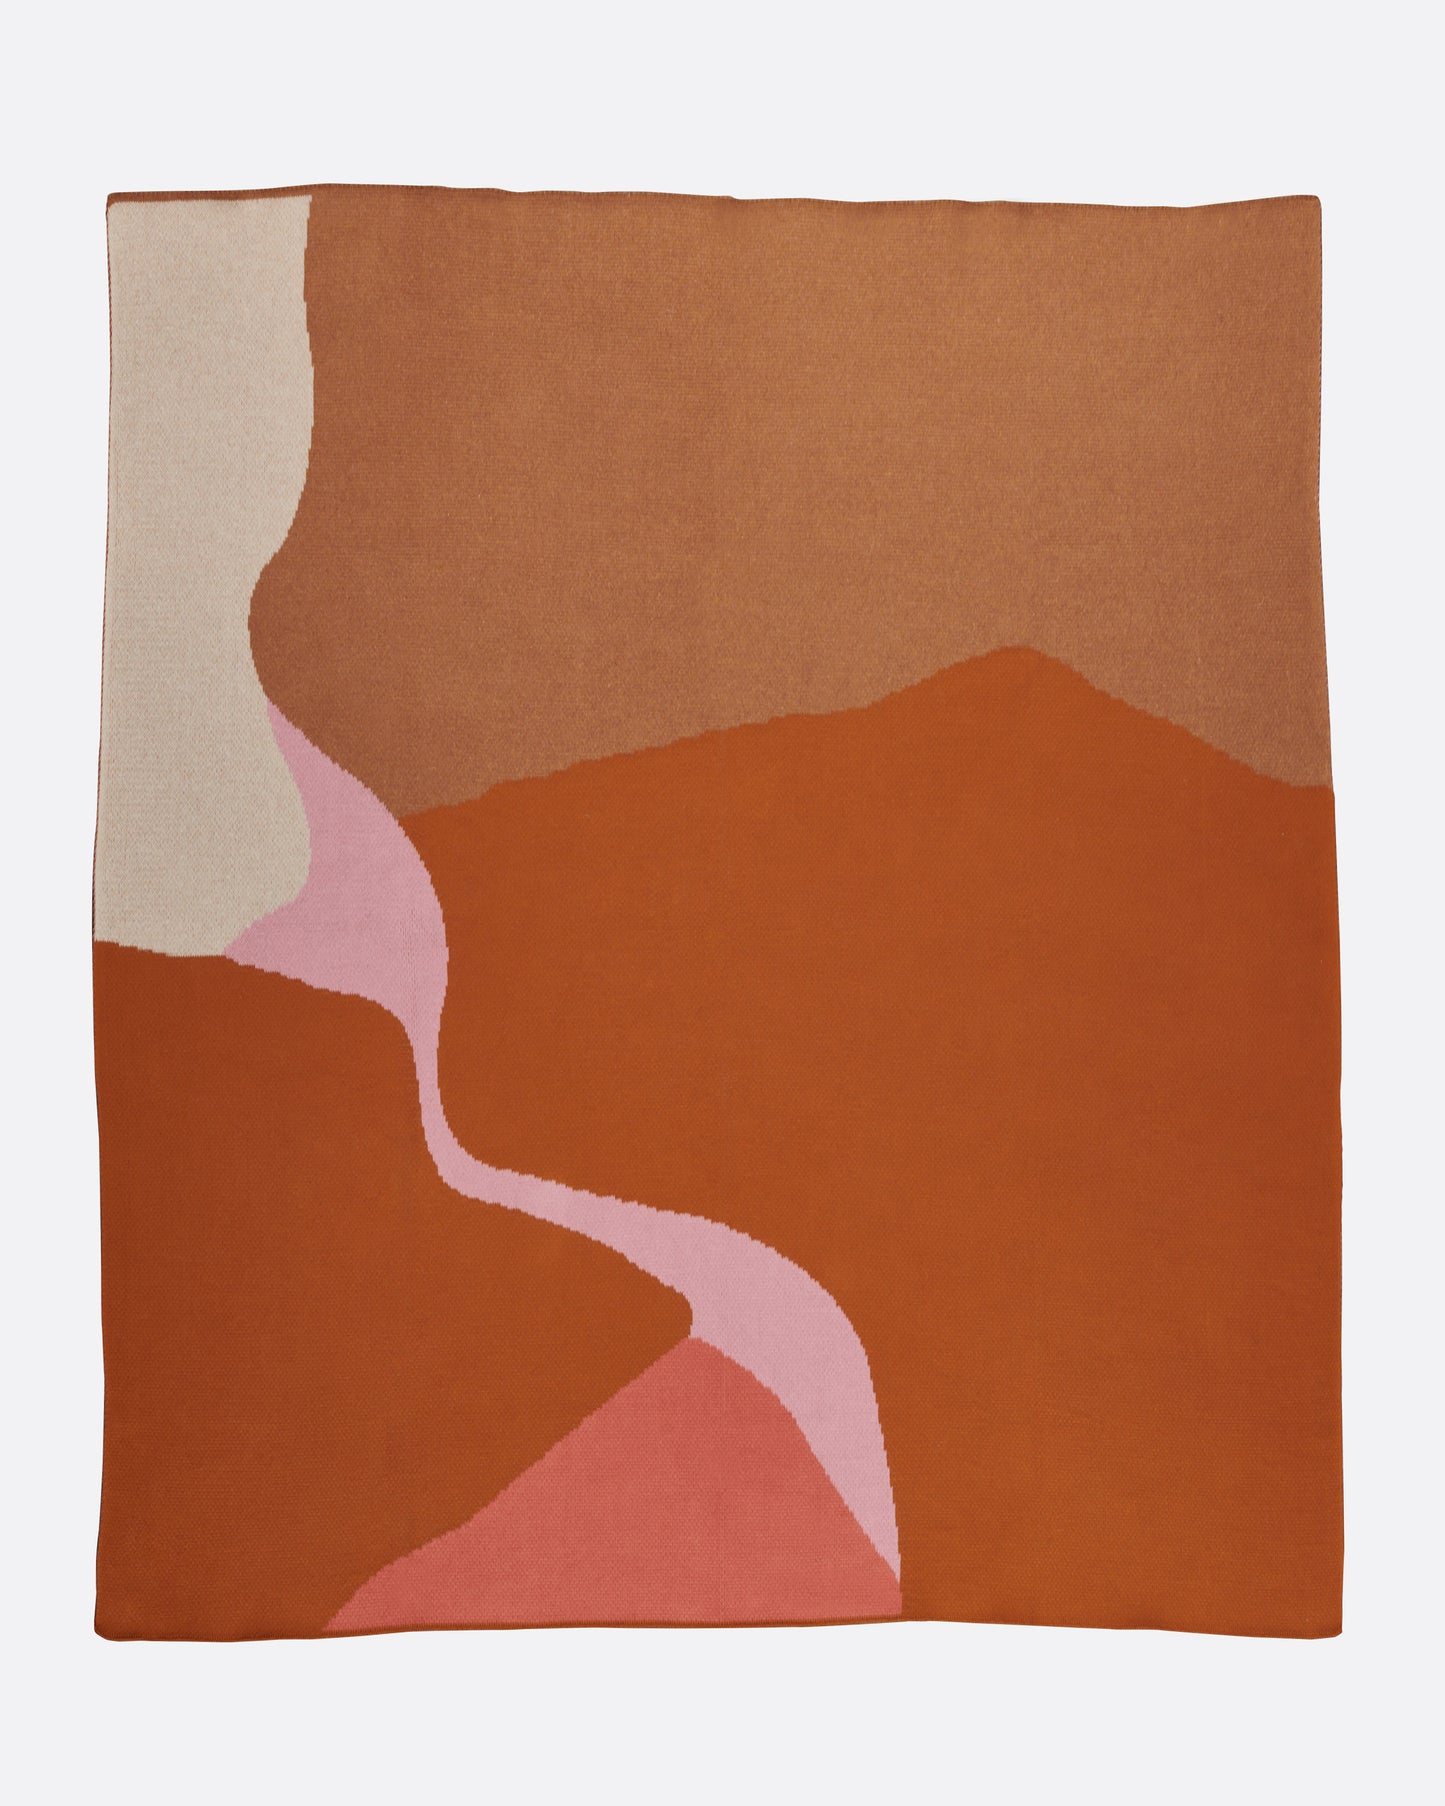 A long knit jacquard throw blanket featuring a minimalist design inspired by the Mojave desert, shown from above.